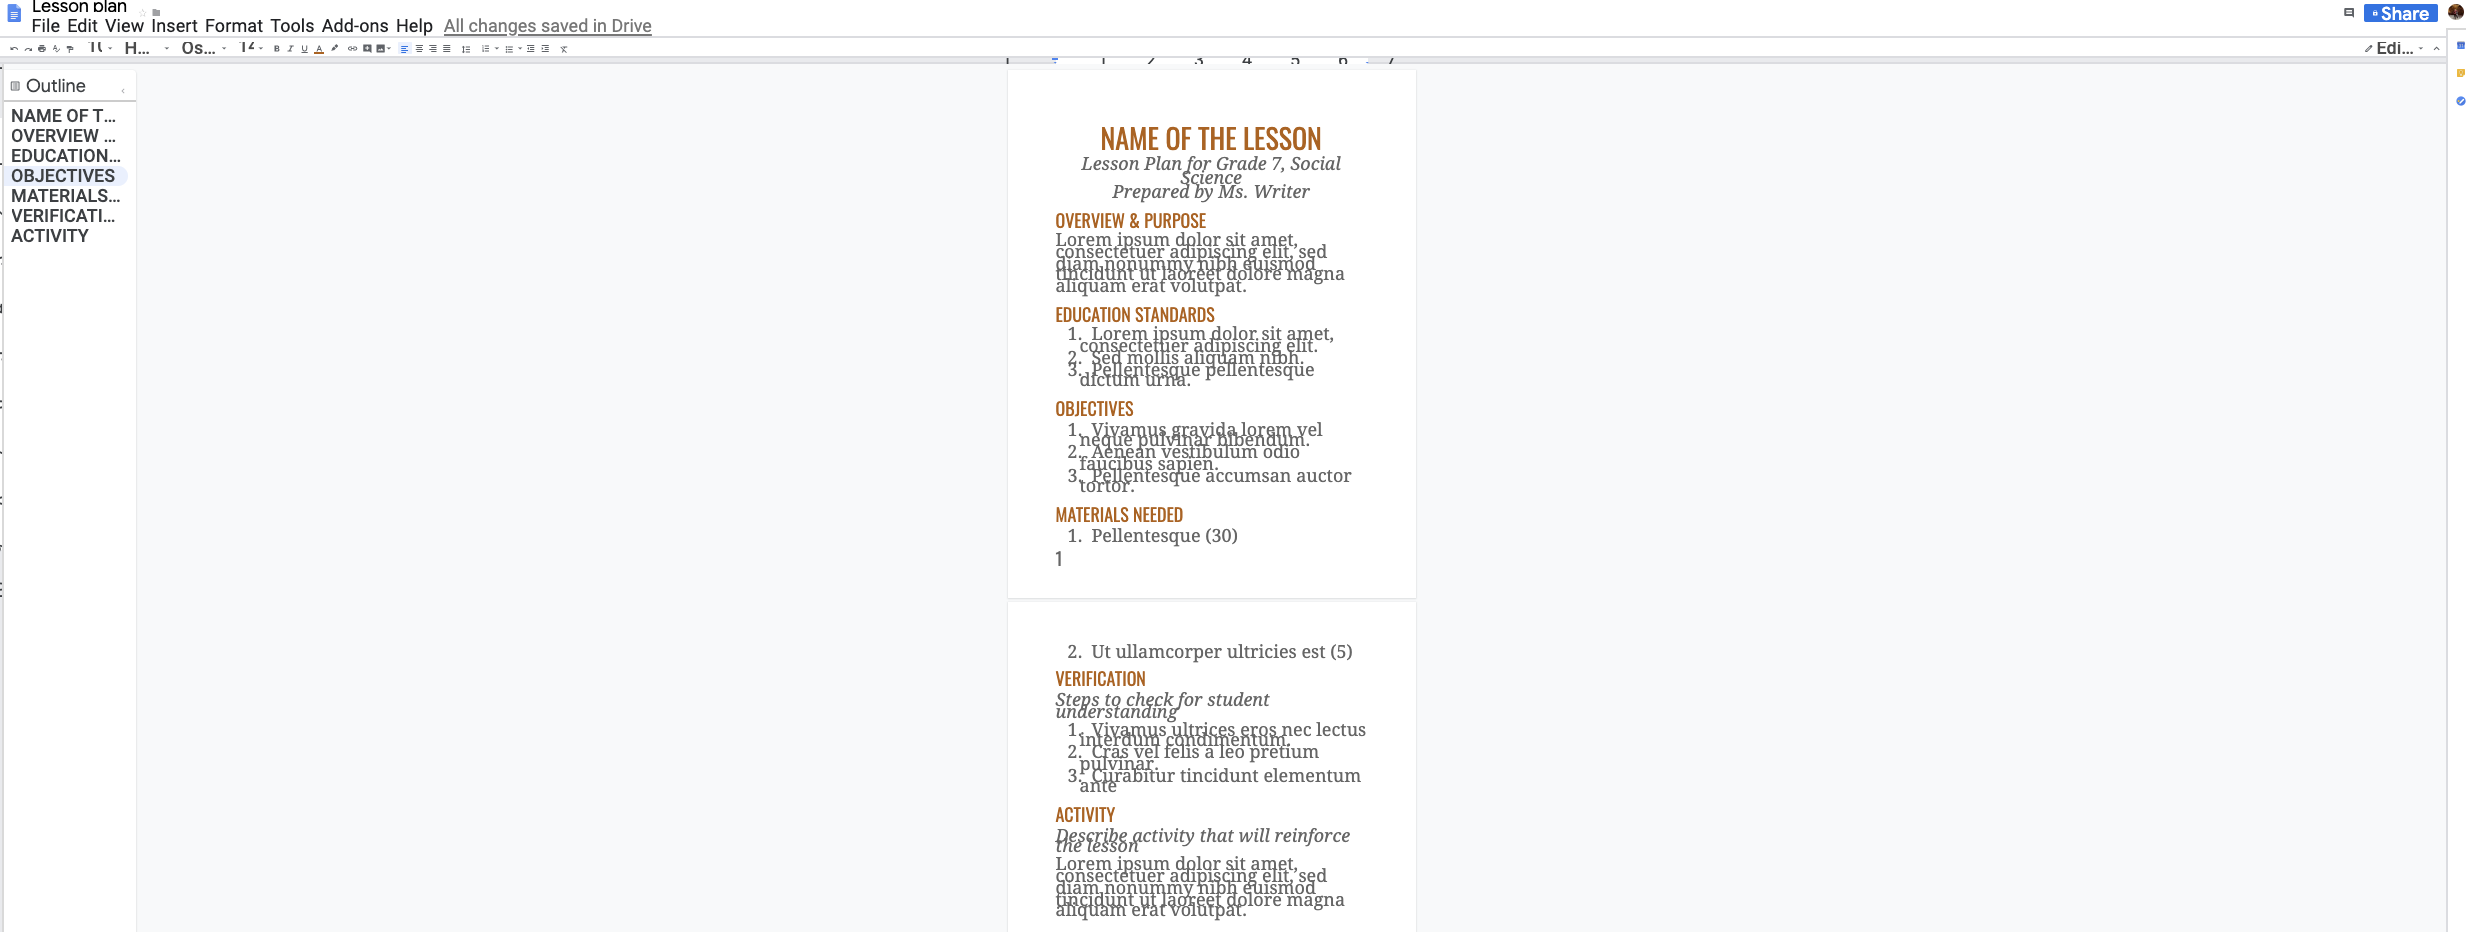 Why does opening in Google Docs mess up formatting?